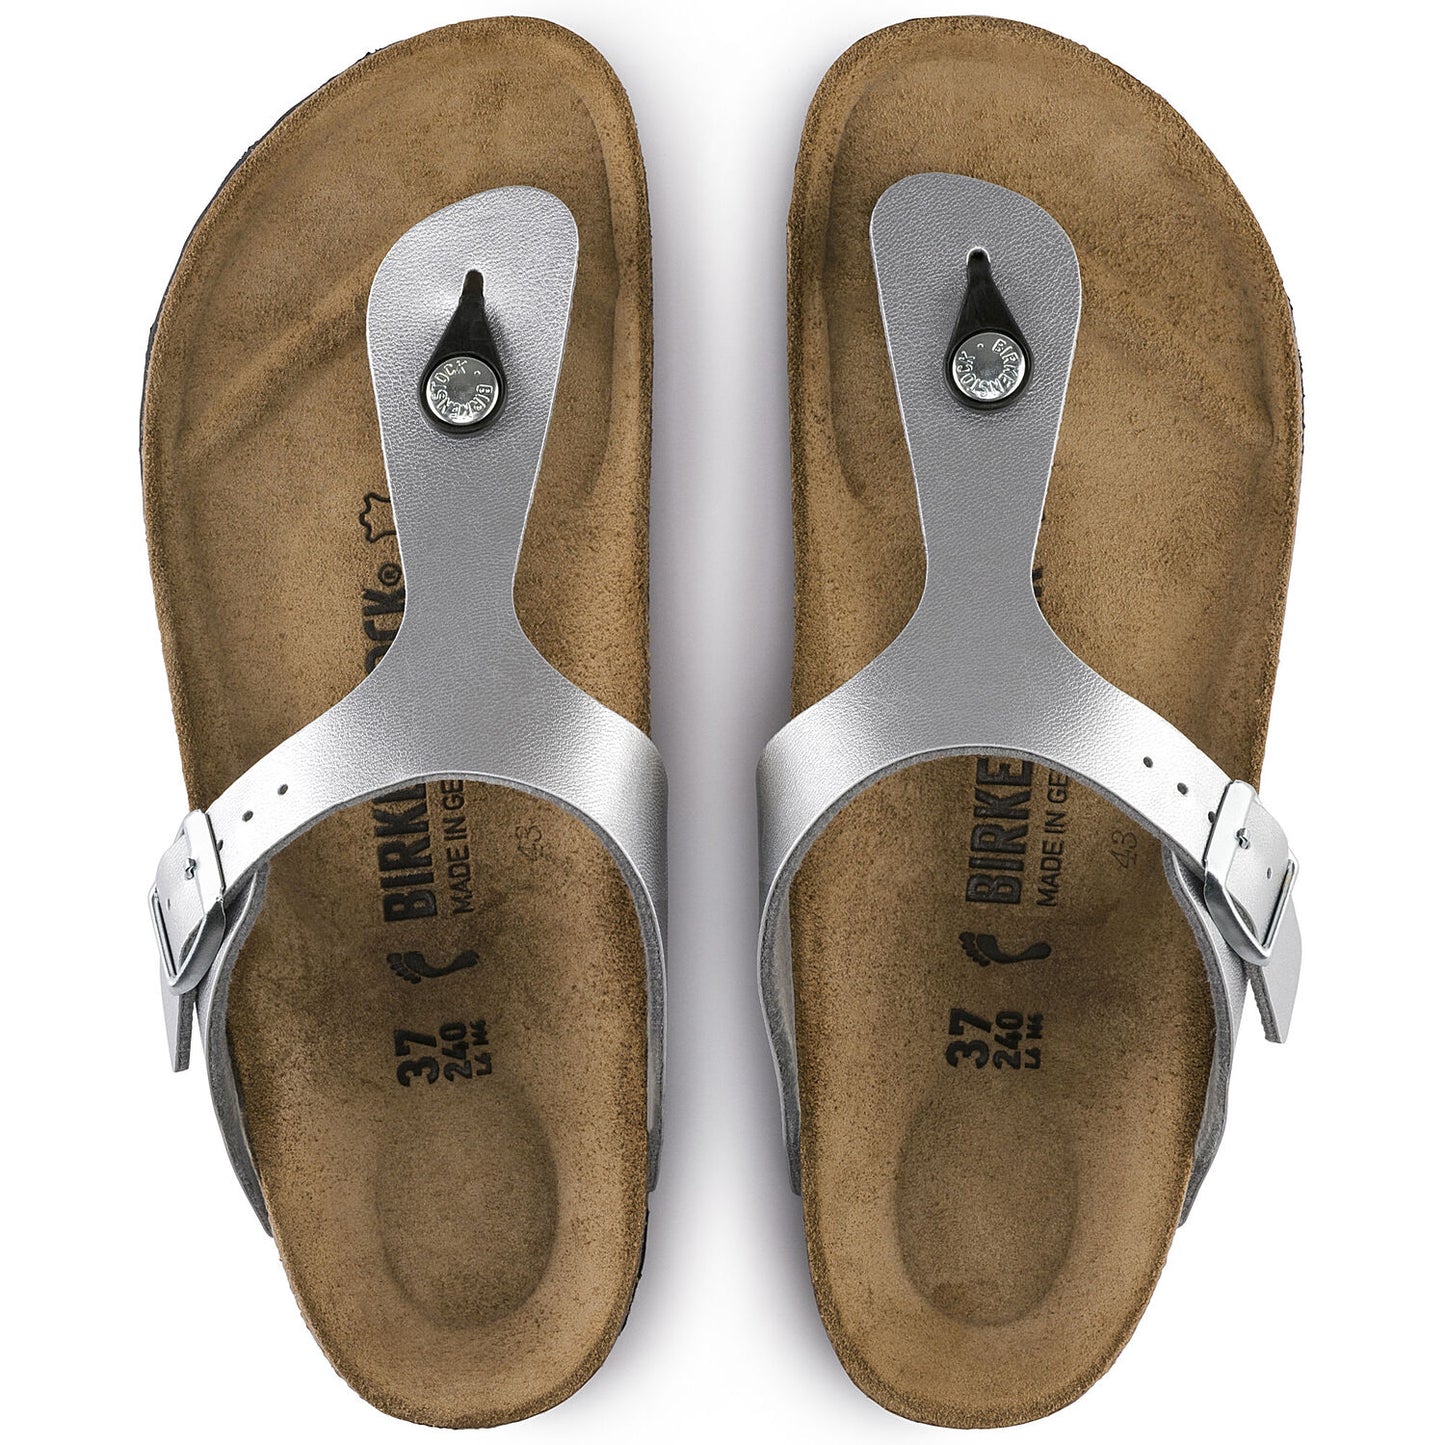 BIRKENSTOCK | 女性のサンダル | GIZEH BS SYNTHETICS SYN WASHED METALLIC SILVER | 銀